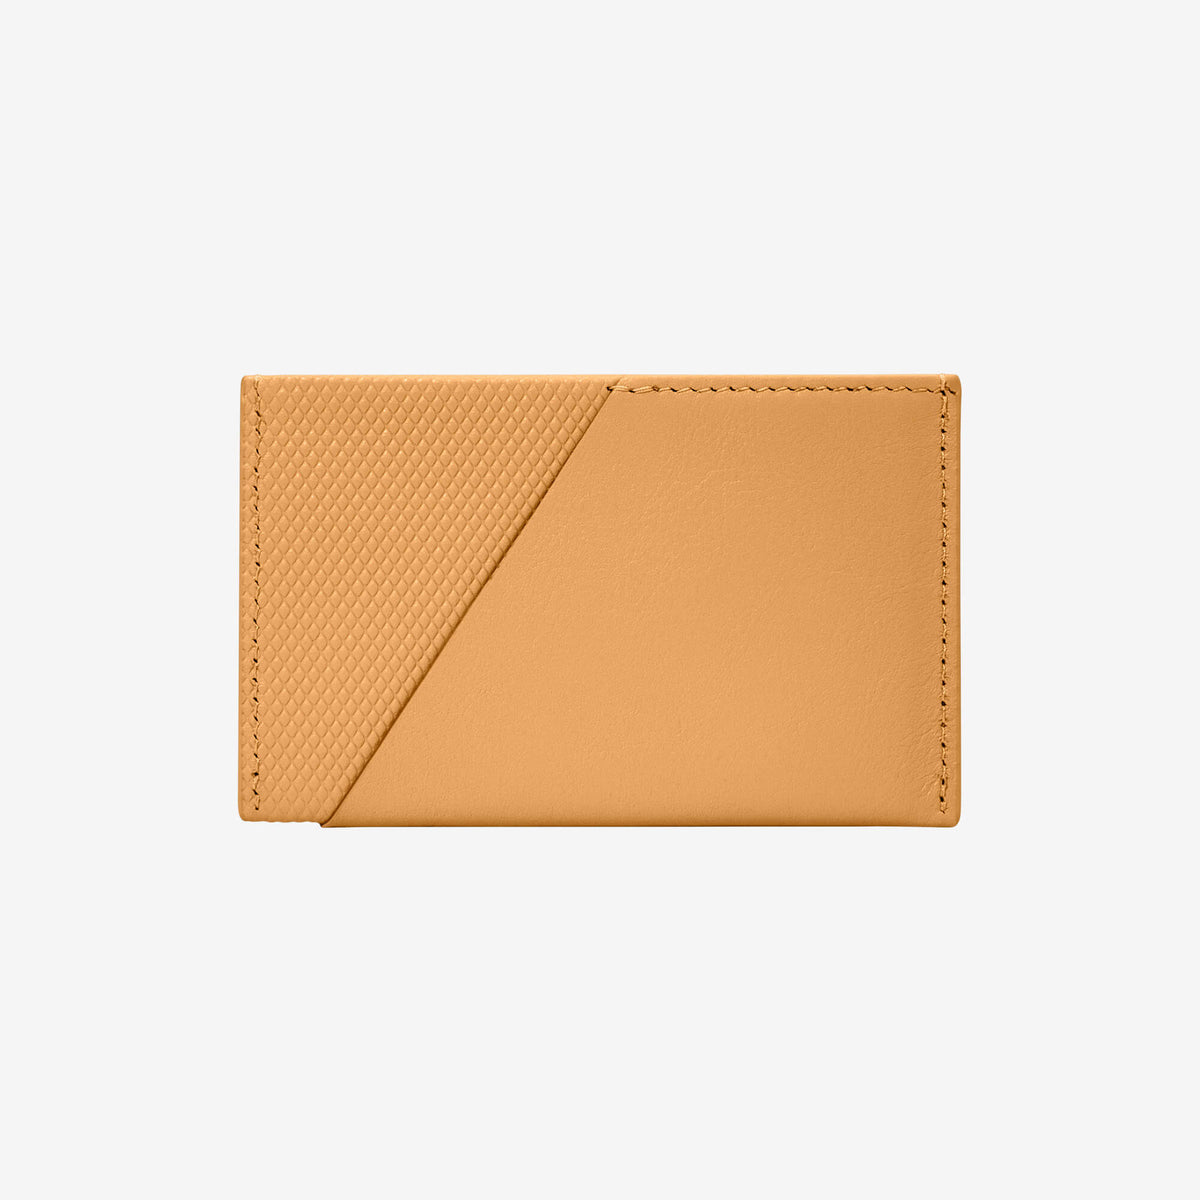 Native Union - Heritage Card Holder #color_ocre